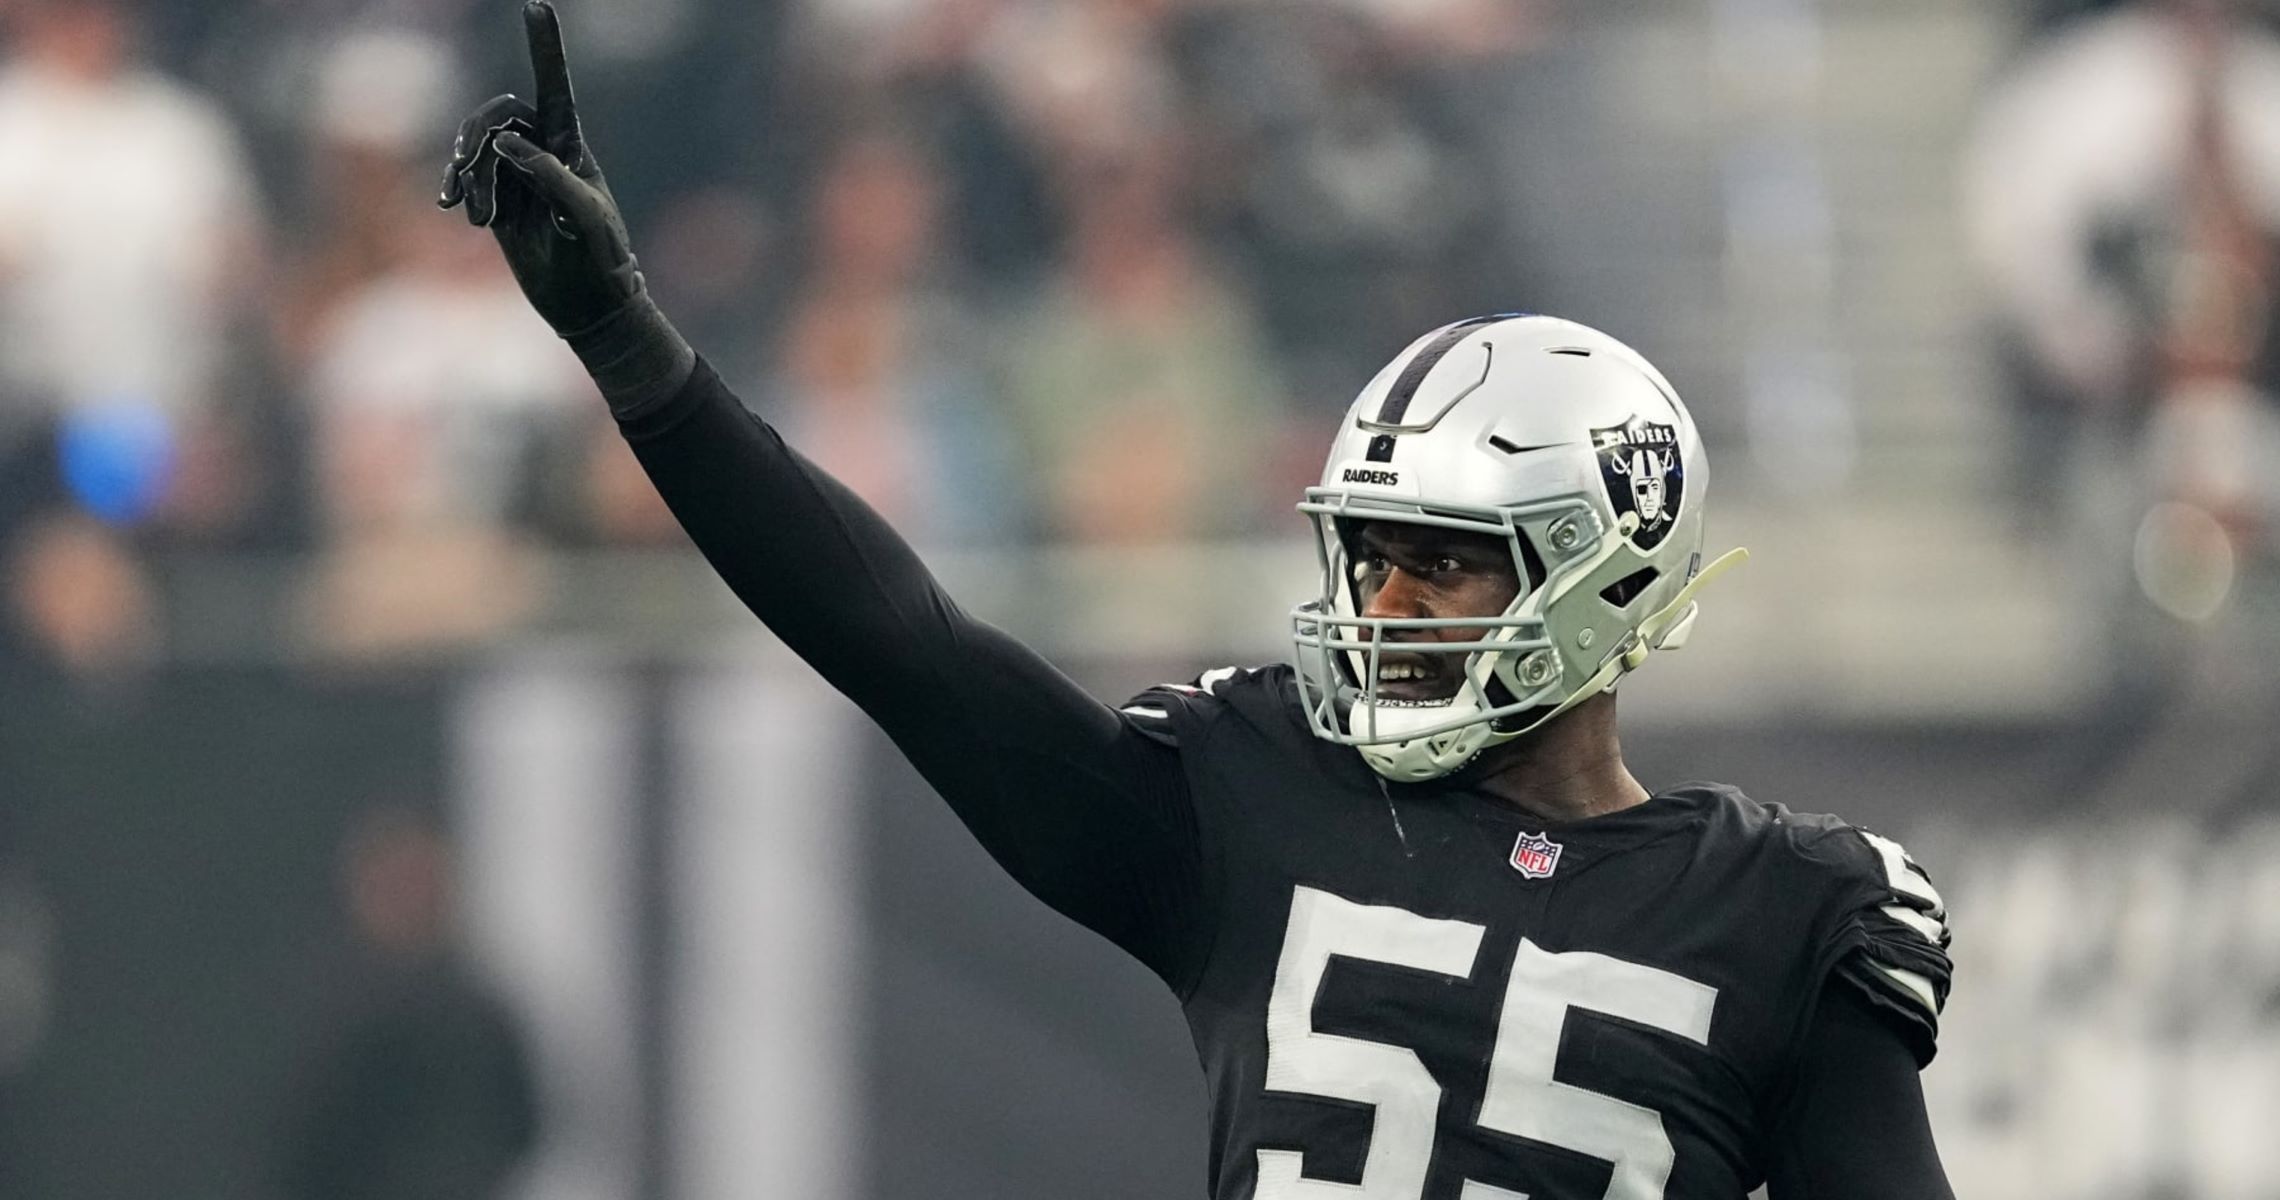 chandler-jones-expresses-discontent-with-raiders-claims-he-doesnt-want-to-play-for-them